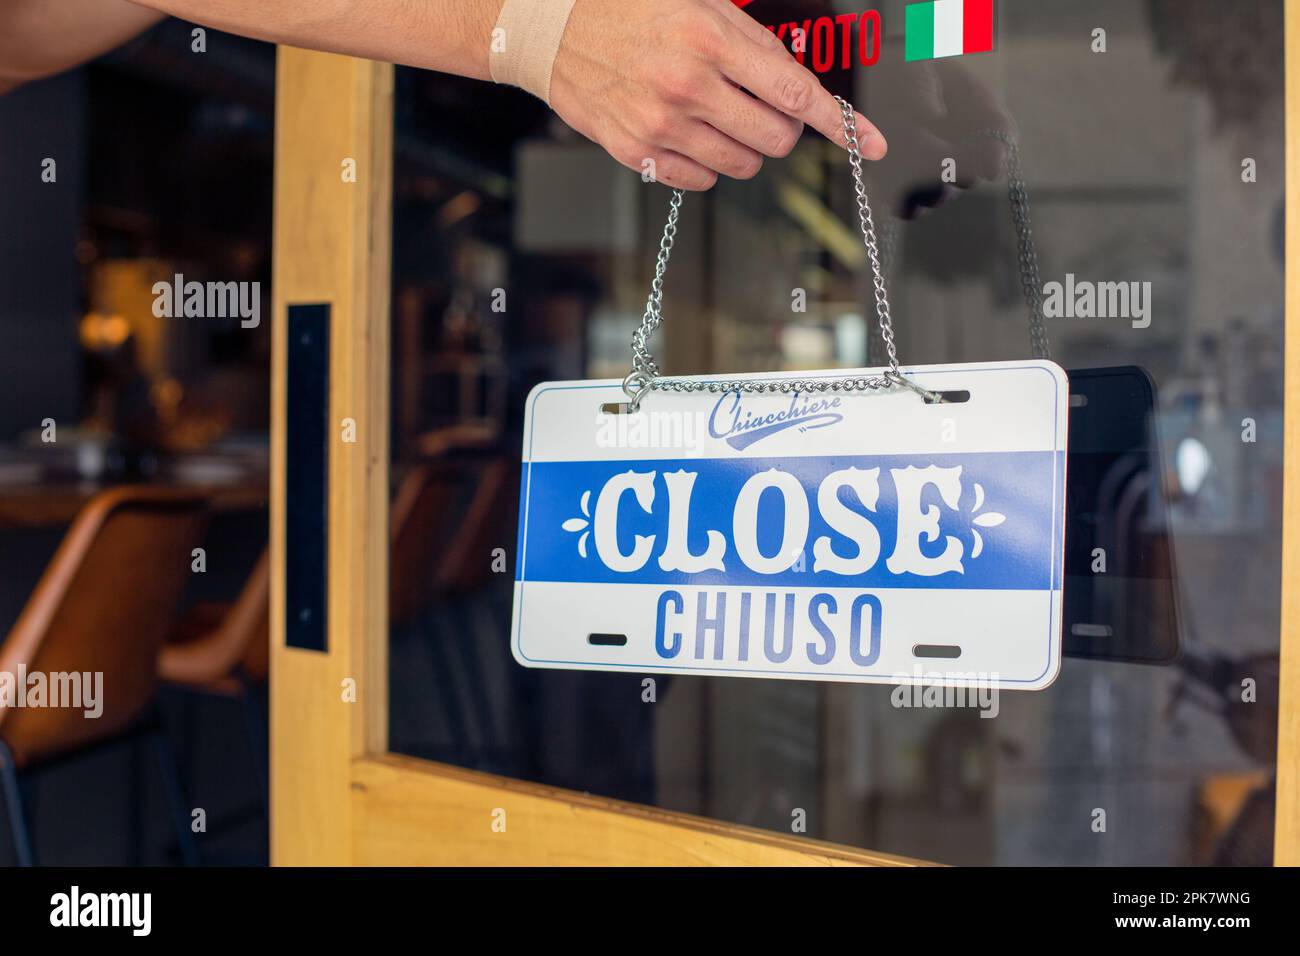 A person hanging up a sign on a restaurant door, reading Close. Closed, dual language, English and Italian. Stock Photo